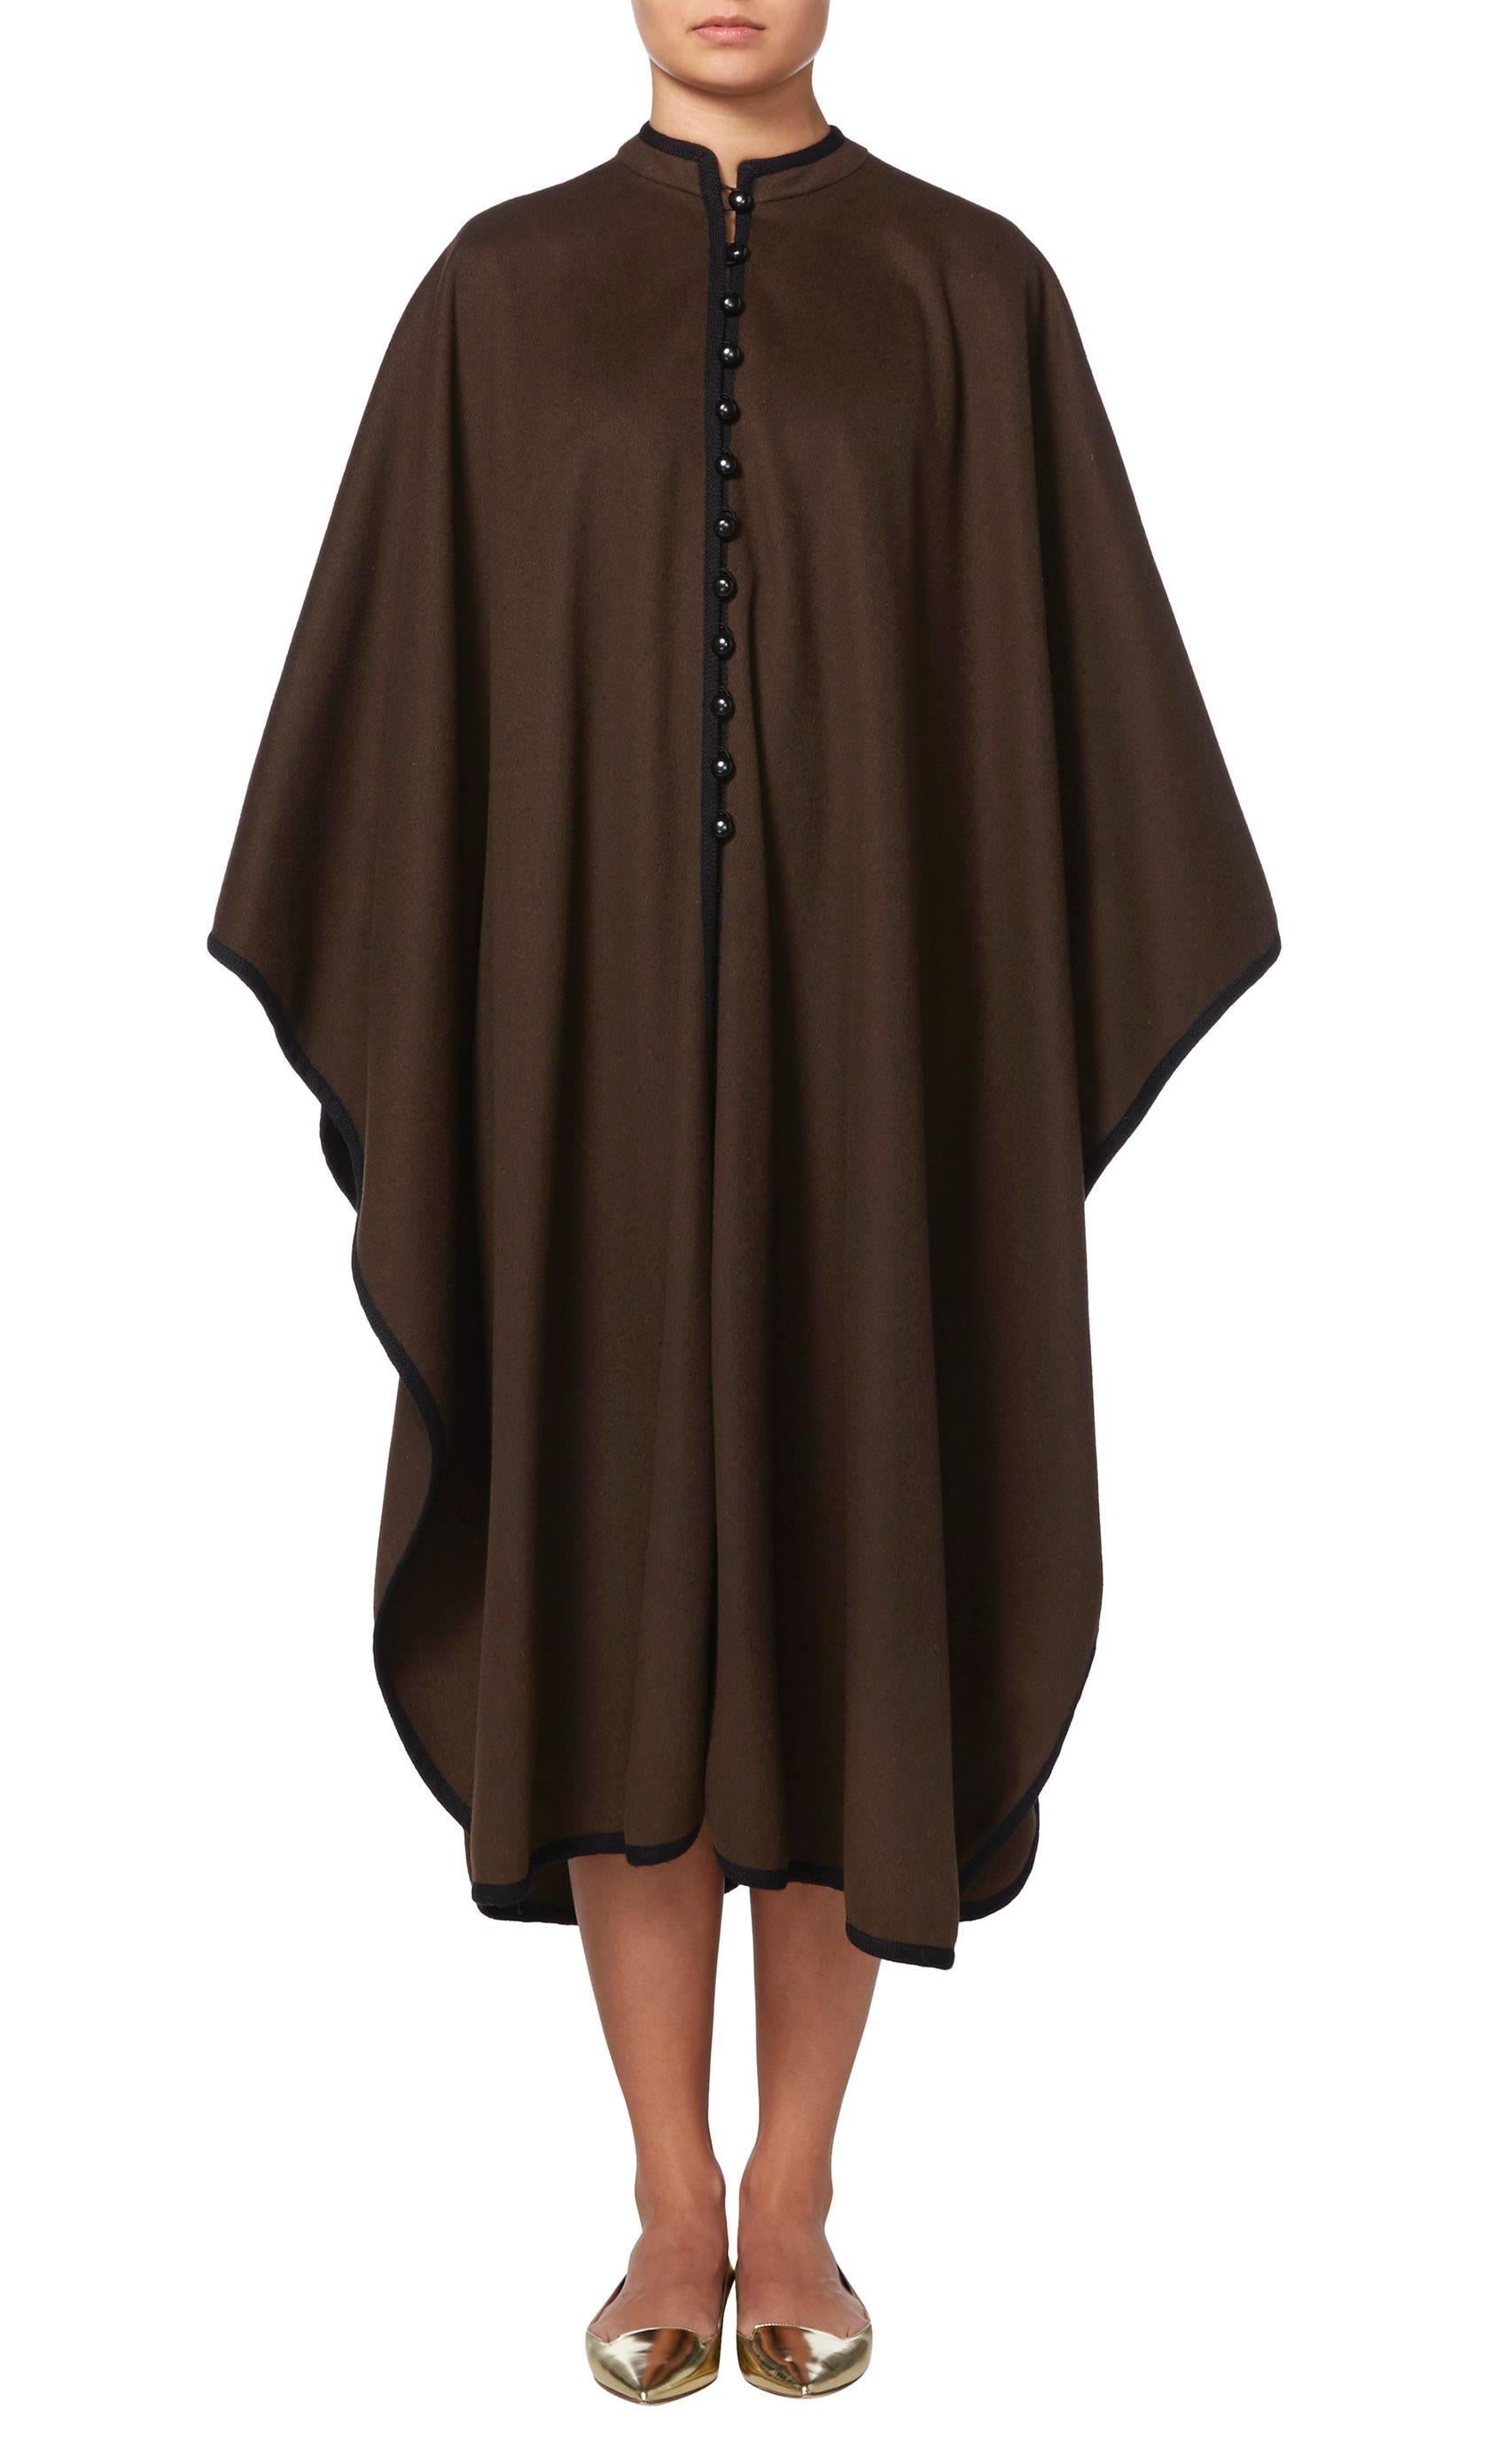 This Yves Saint Laurent cape is a fantastic coverup for cold winter days. Constructed in brown wool and featuring a contrasting black braid, the cape has a standing collar and buttons to the front. Throw on over jeans for weekends in the country or